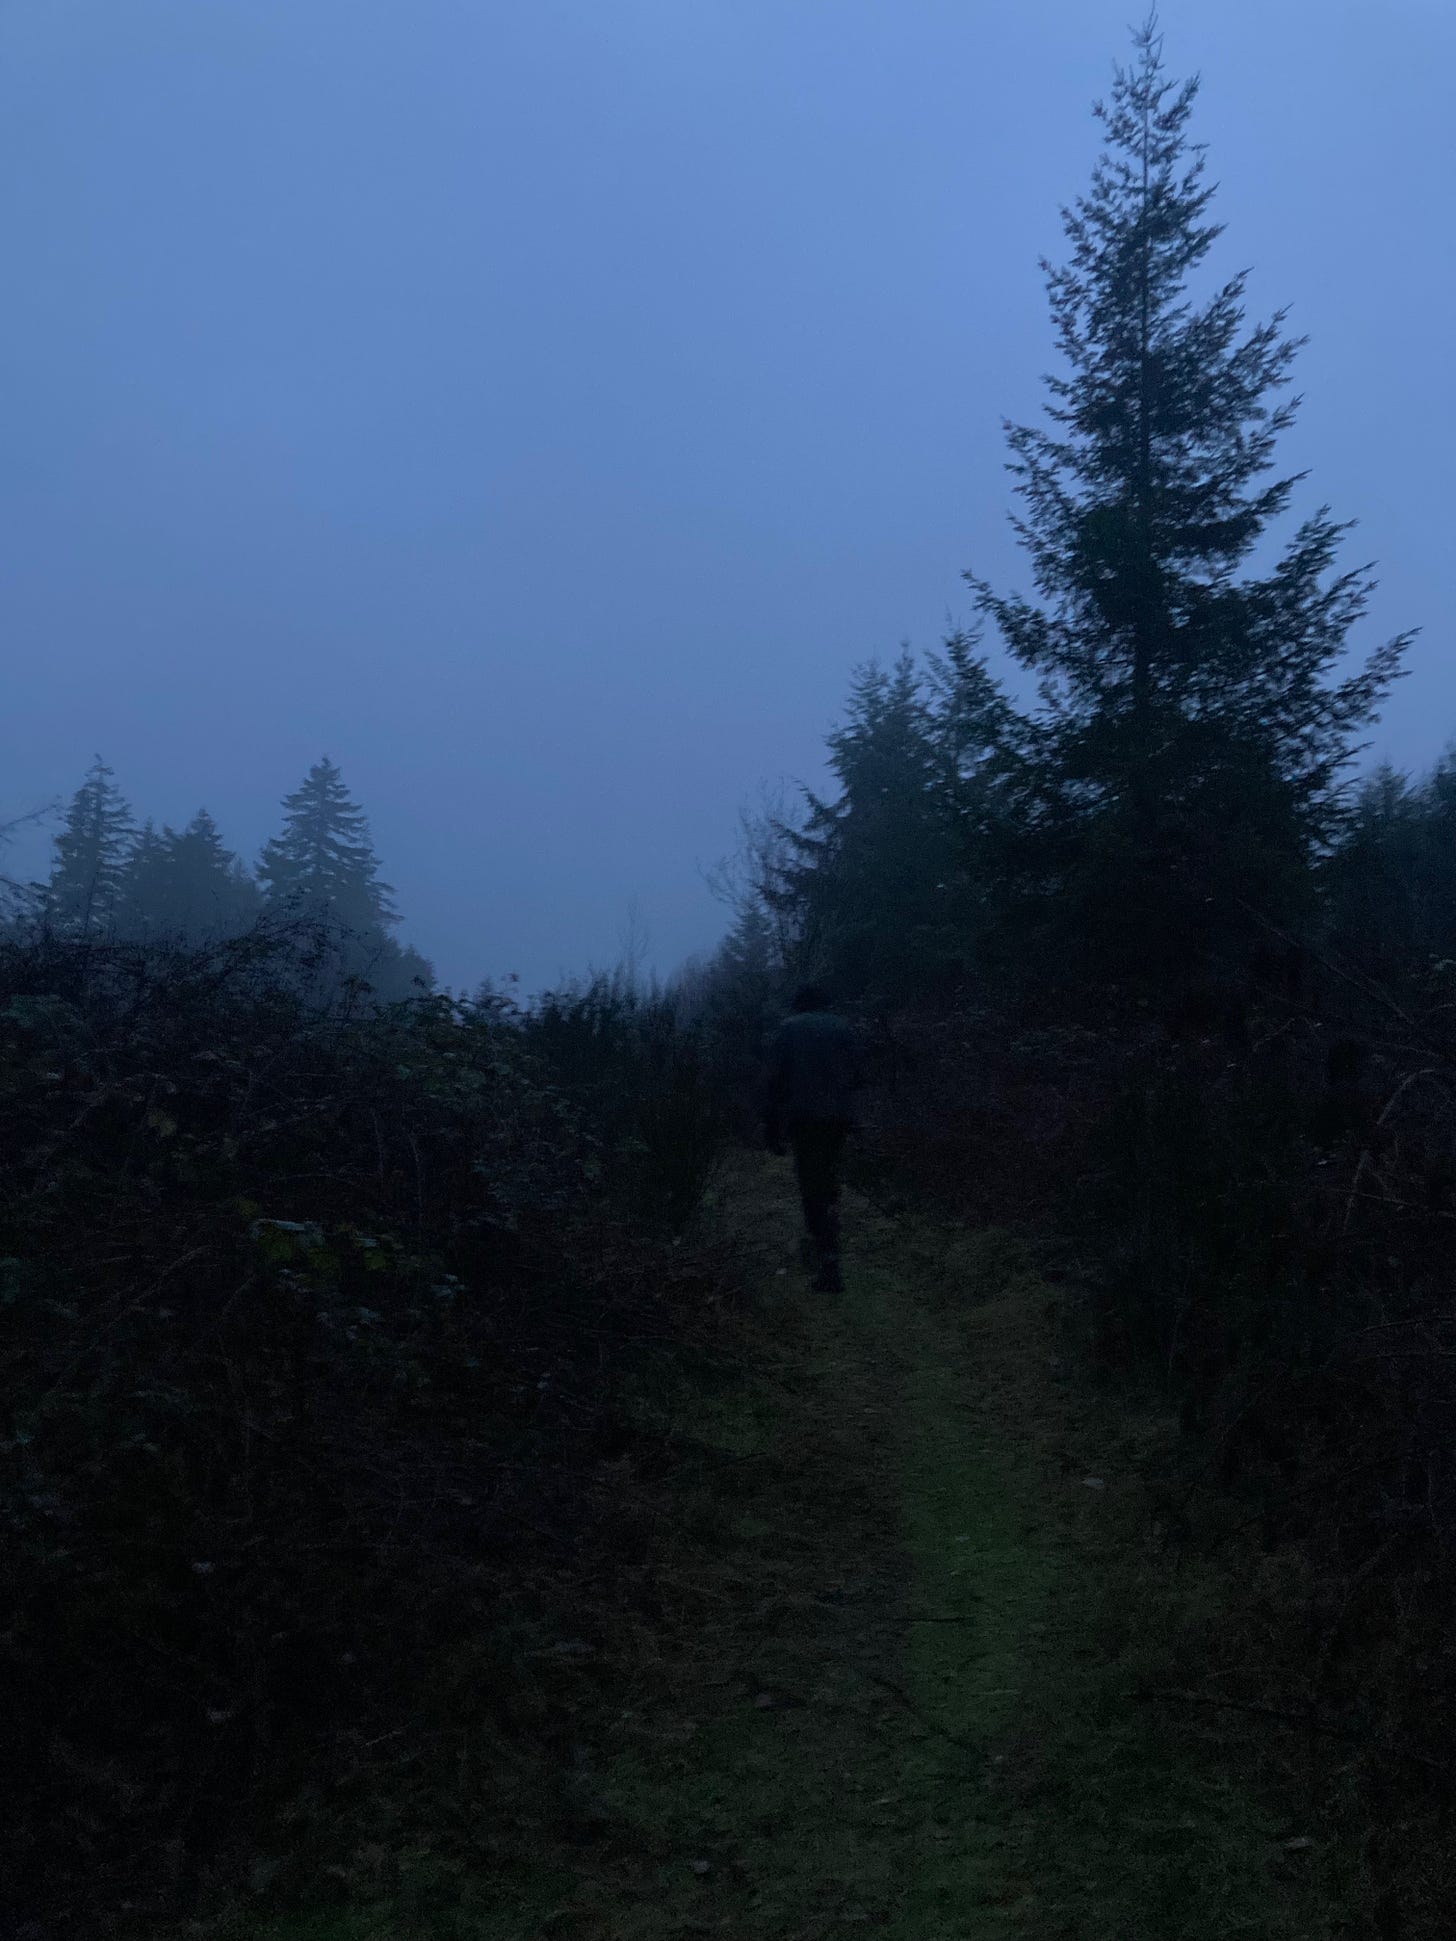 A trail in the forest at dusk